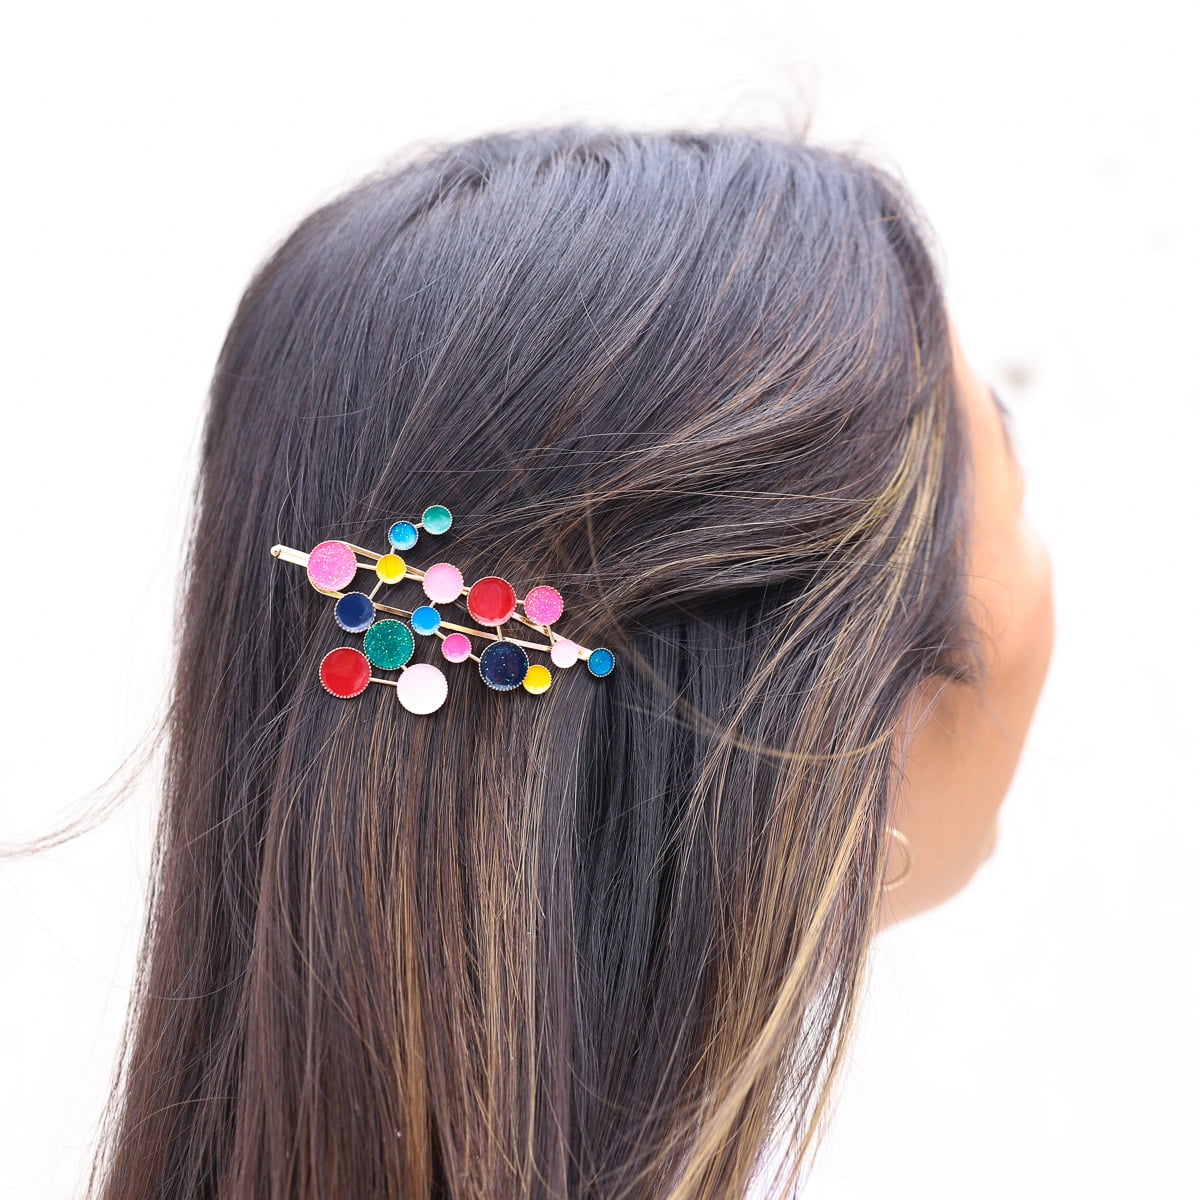 Packed Party "Just Add Confetti" Hair Clip